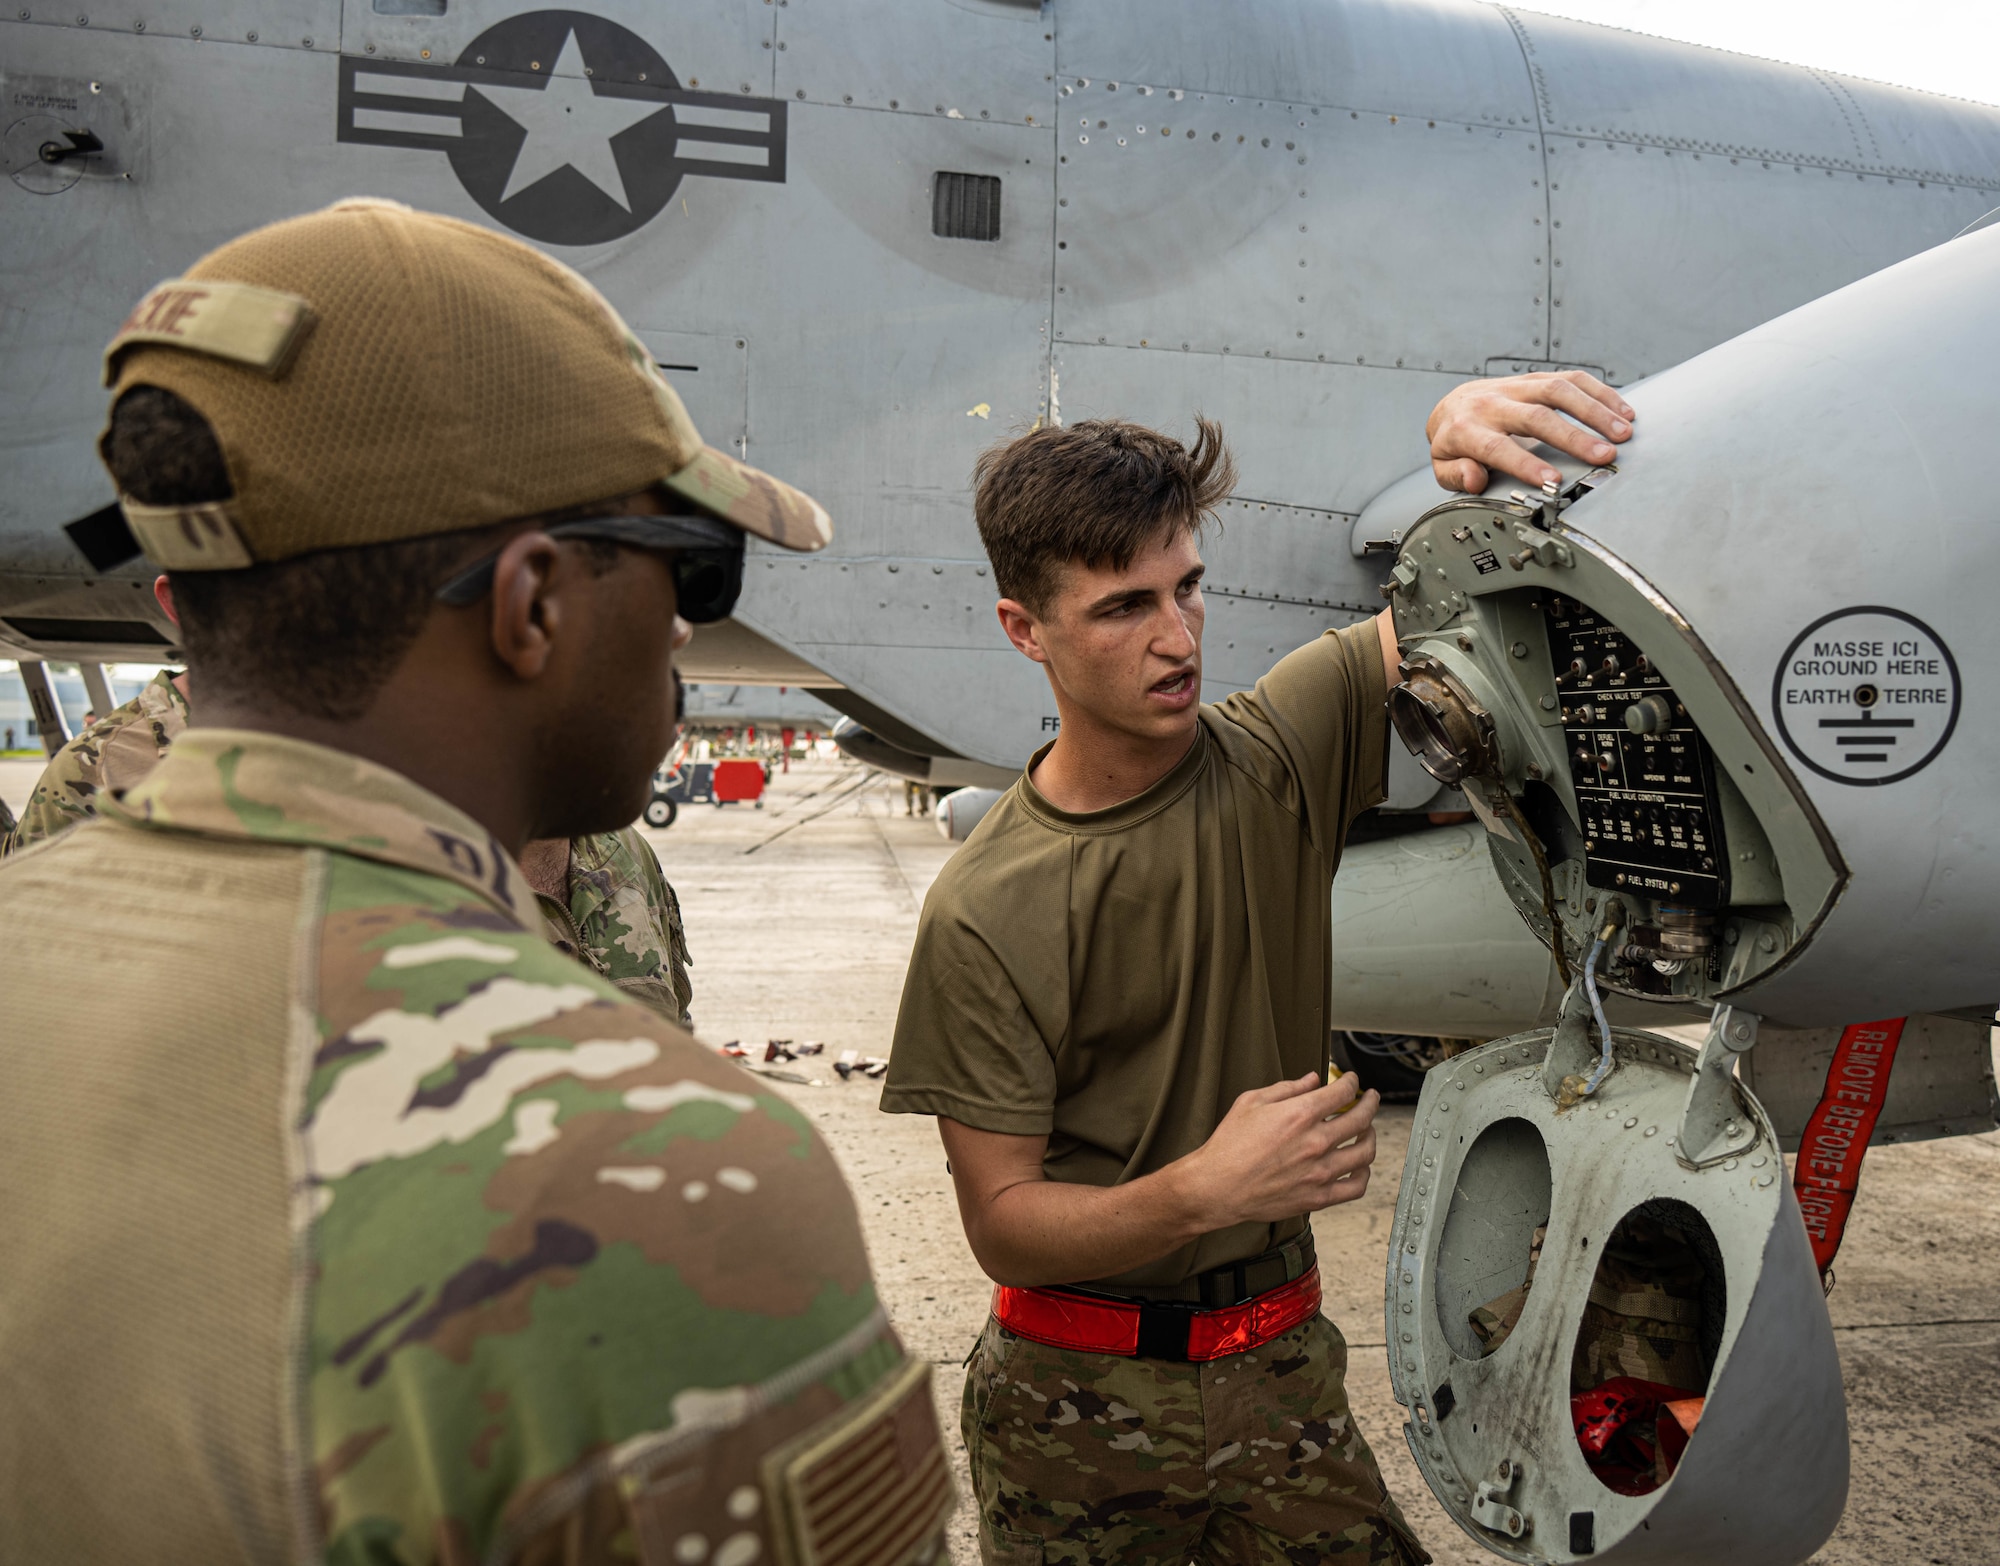 Airman explains refueling an A-10 to others on the flight line.